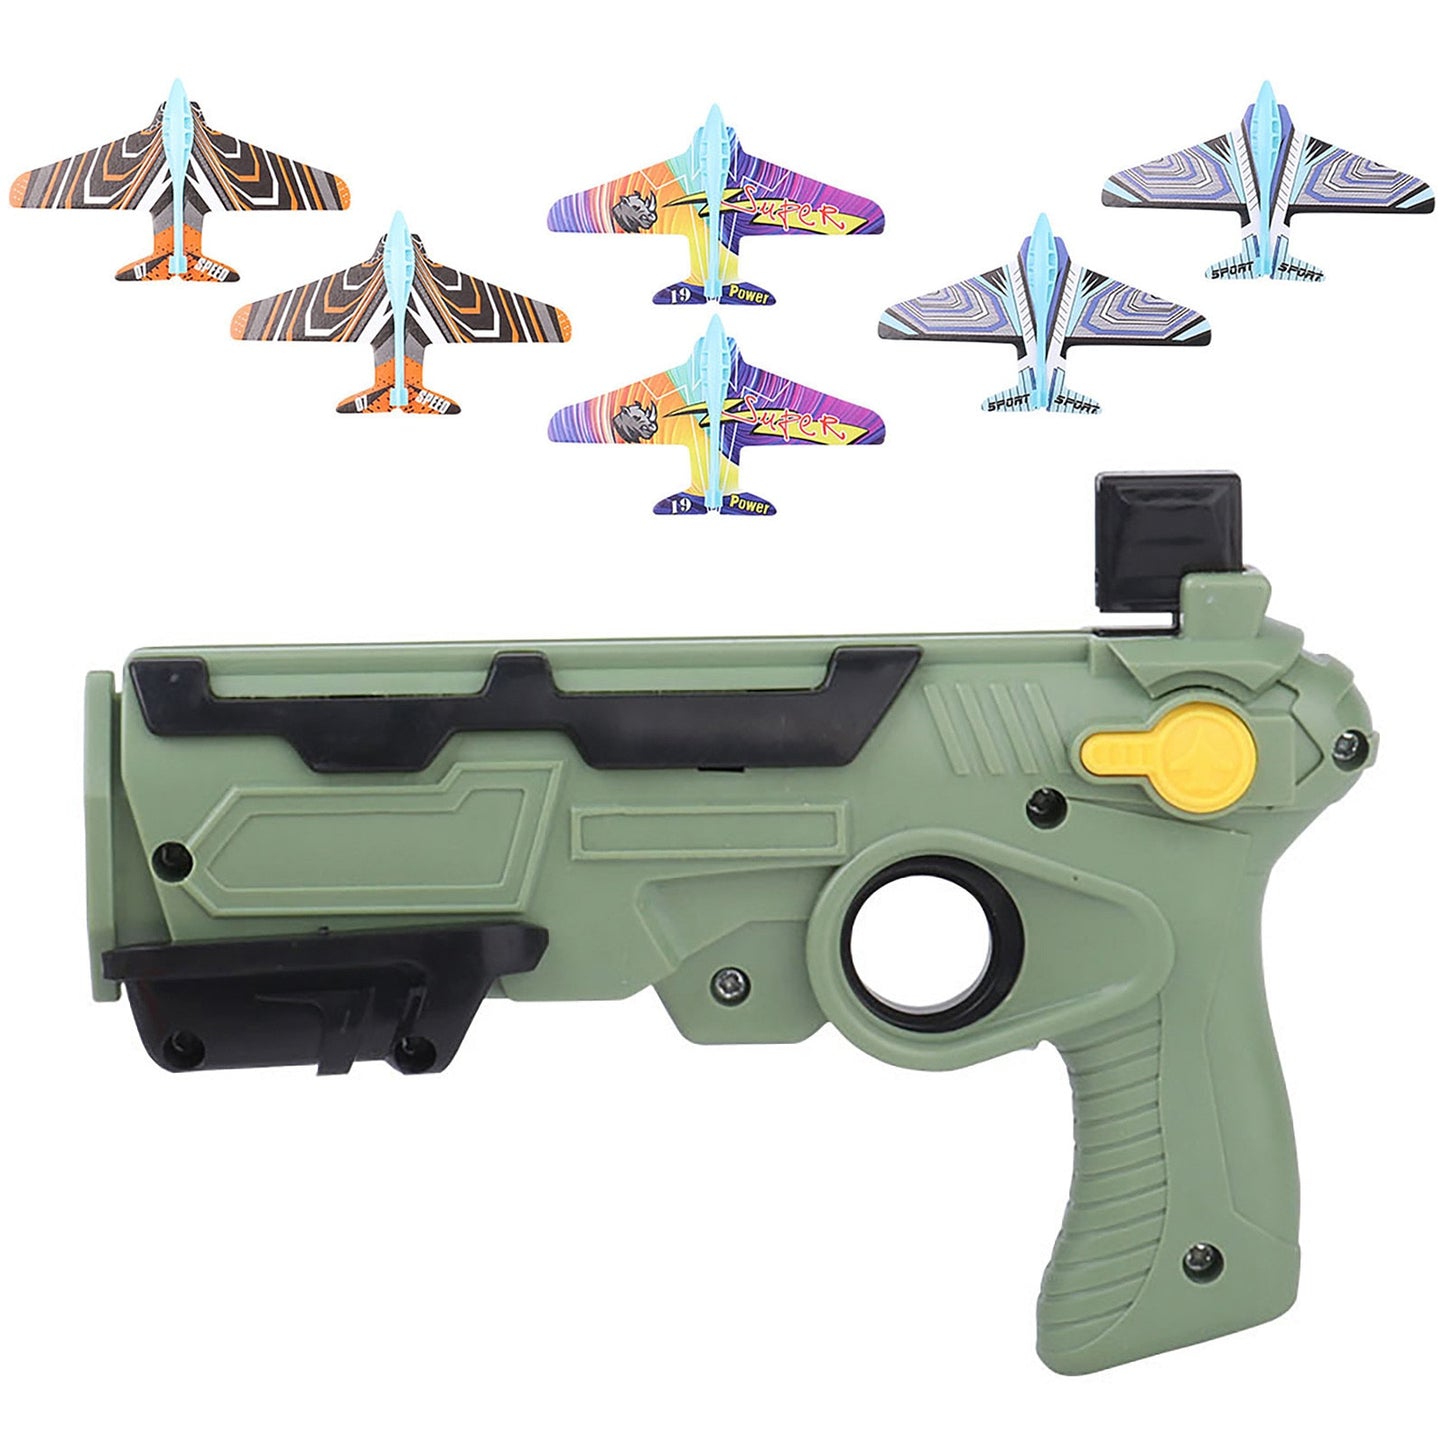 HOT！Airplane Launcher Bubble Catapult With 6 Small Plane Toy Funny Airplane Toys for Kids plane Catapult Gun Shooting Game Gift